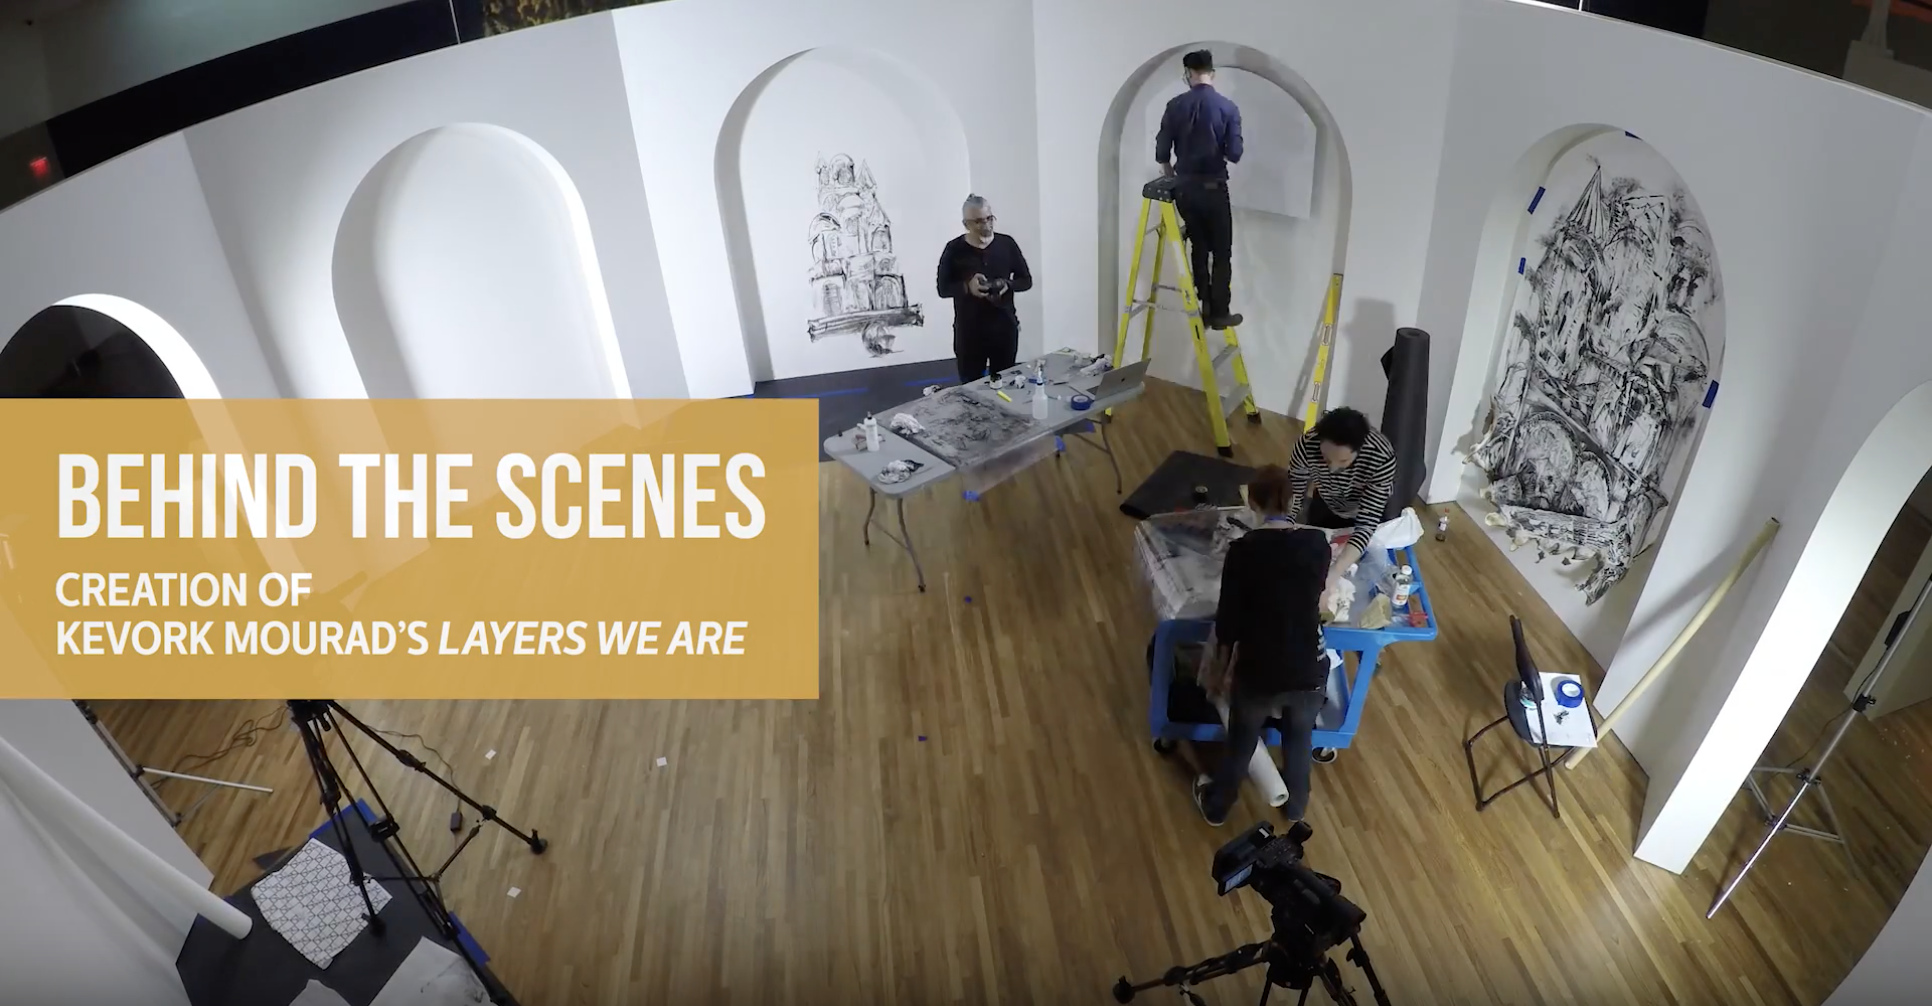 Behind the Scenes: The paintings of Kevork Mourad in “Layers We Are”